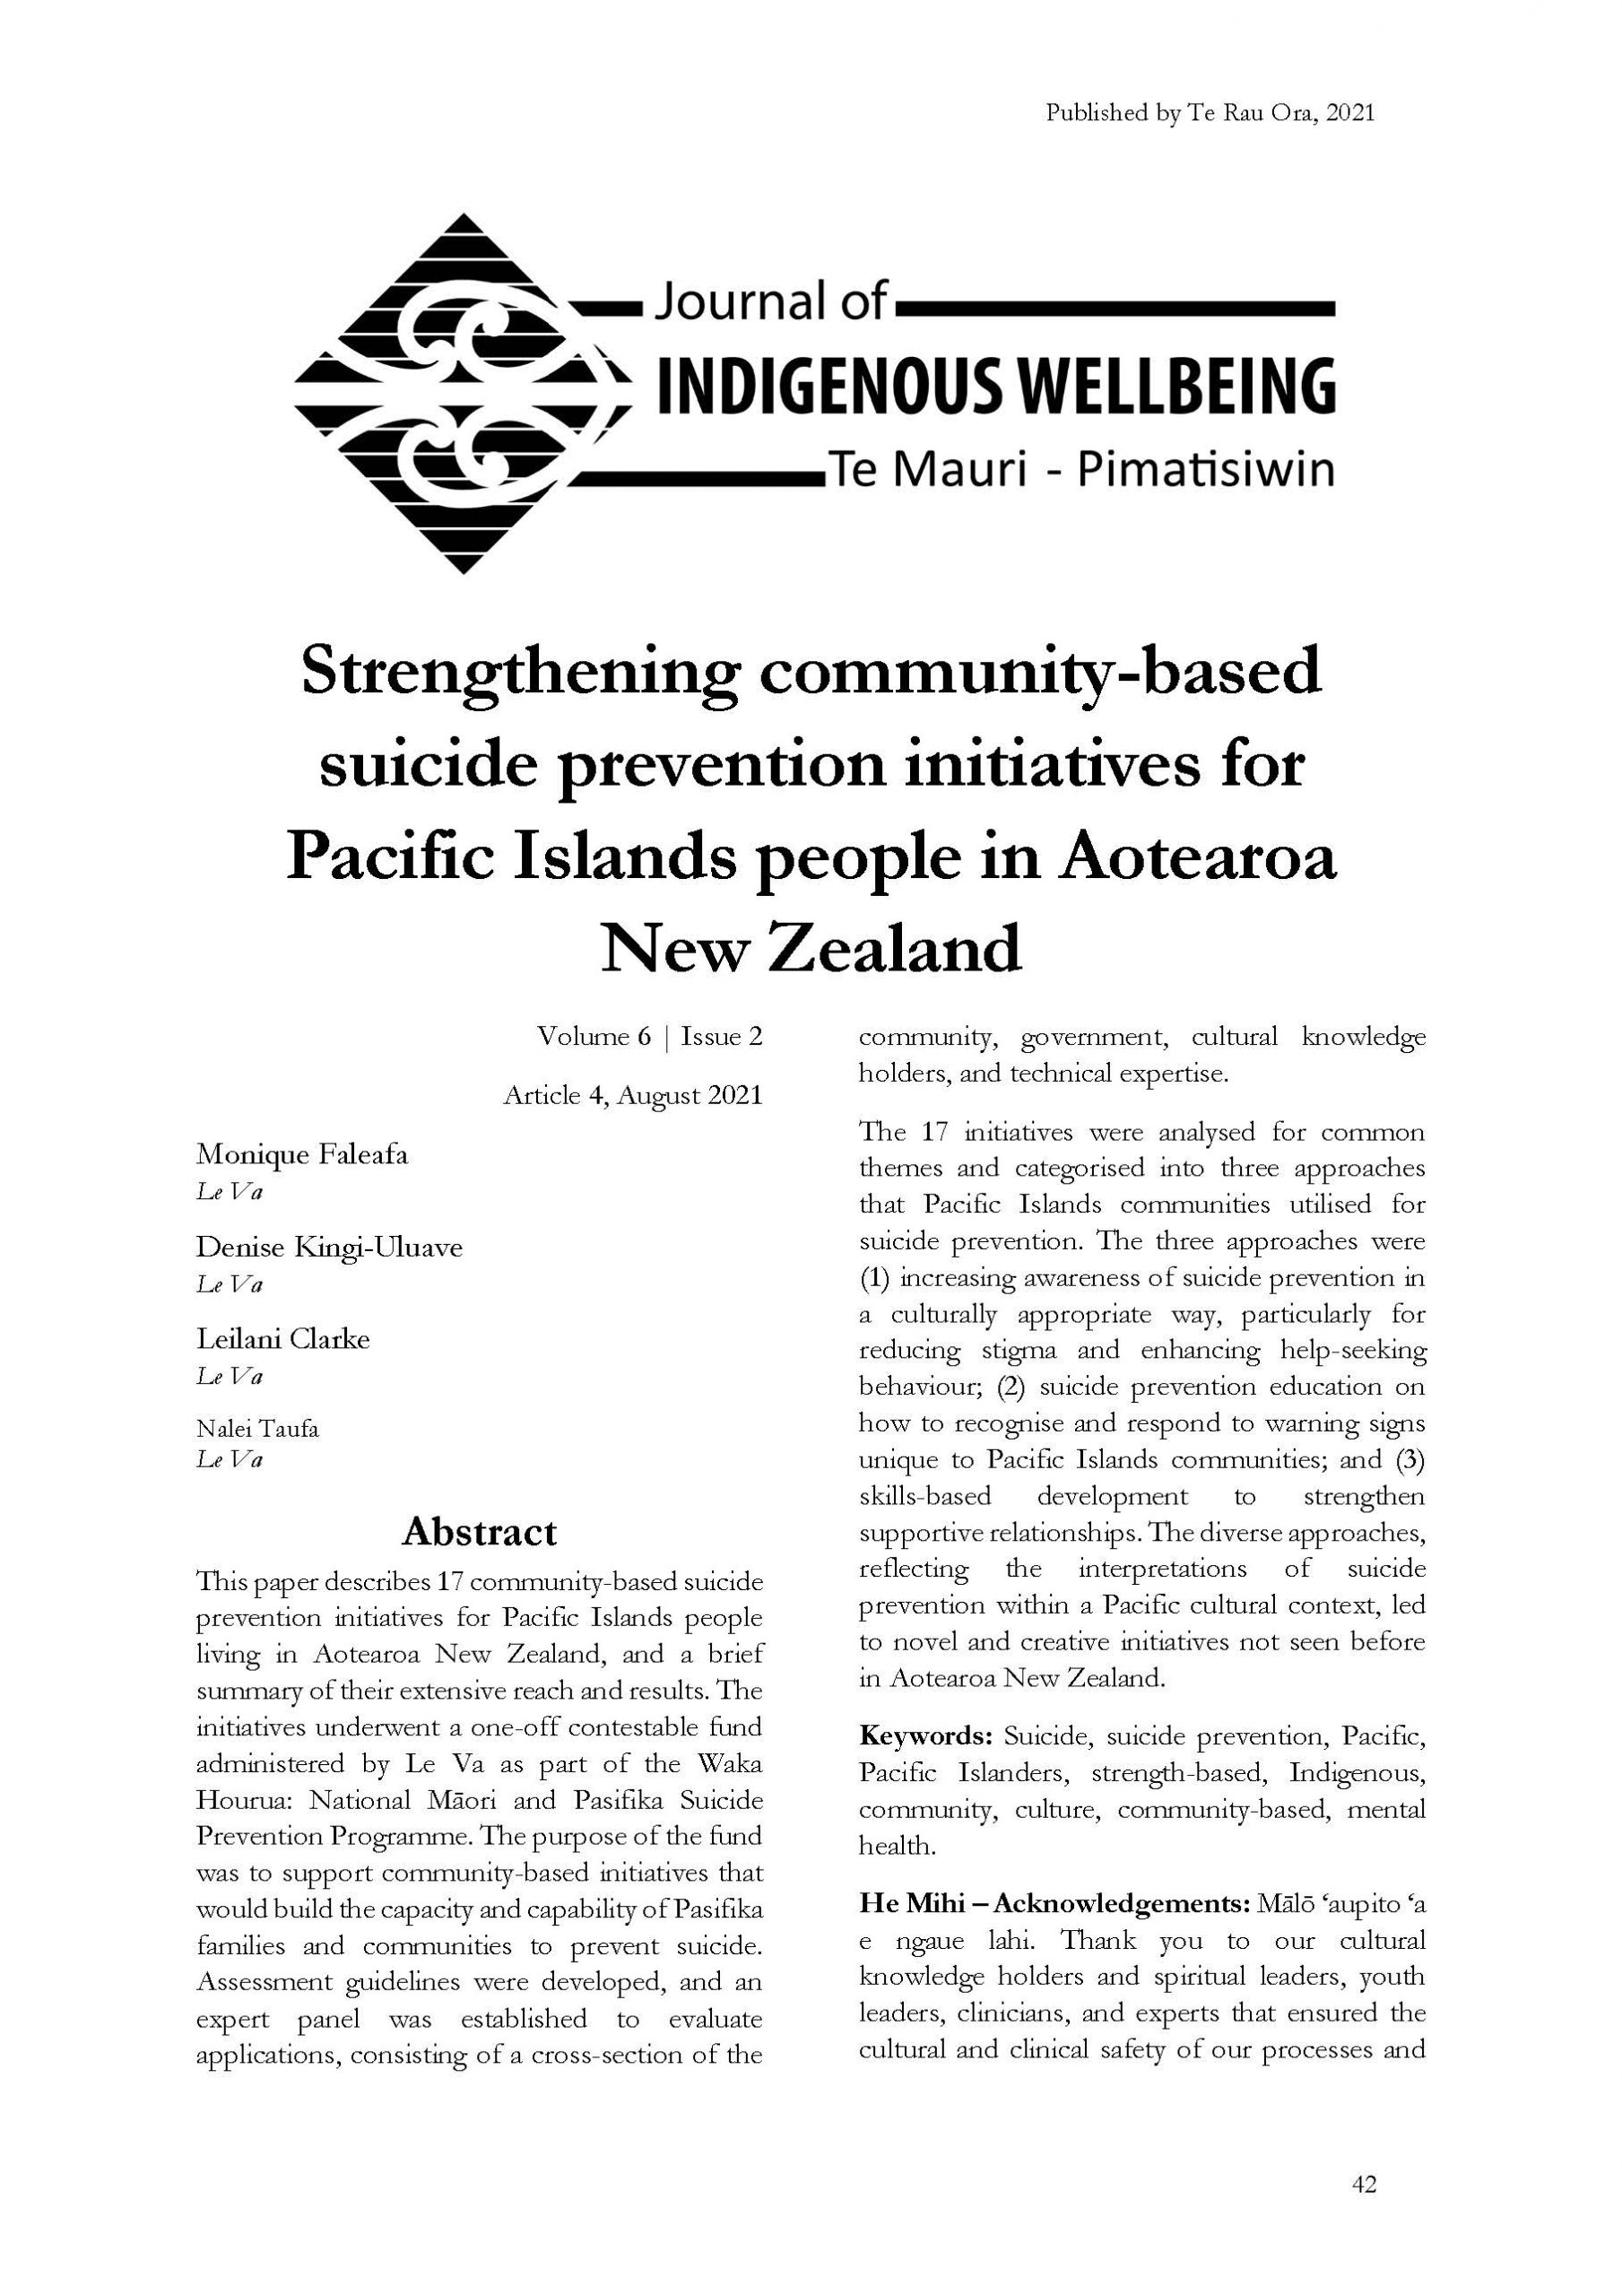 Strengthening community based suicide prevention initiatives for Pacific Islands people in Aotearoa New Zealand cover